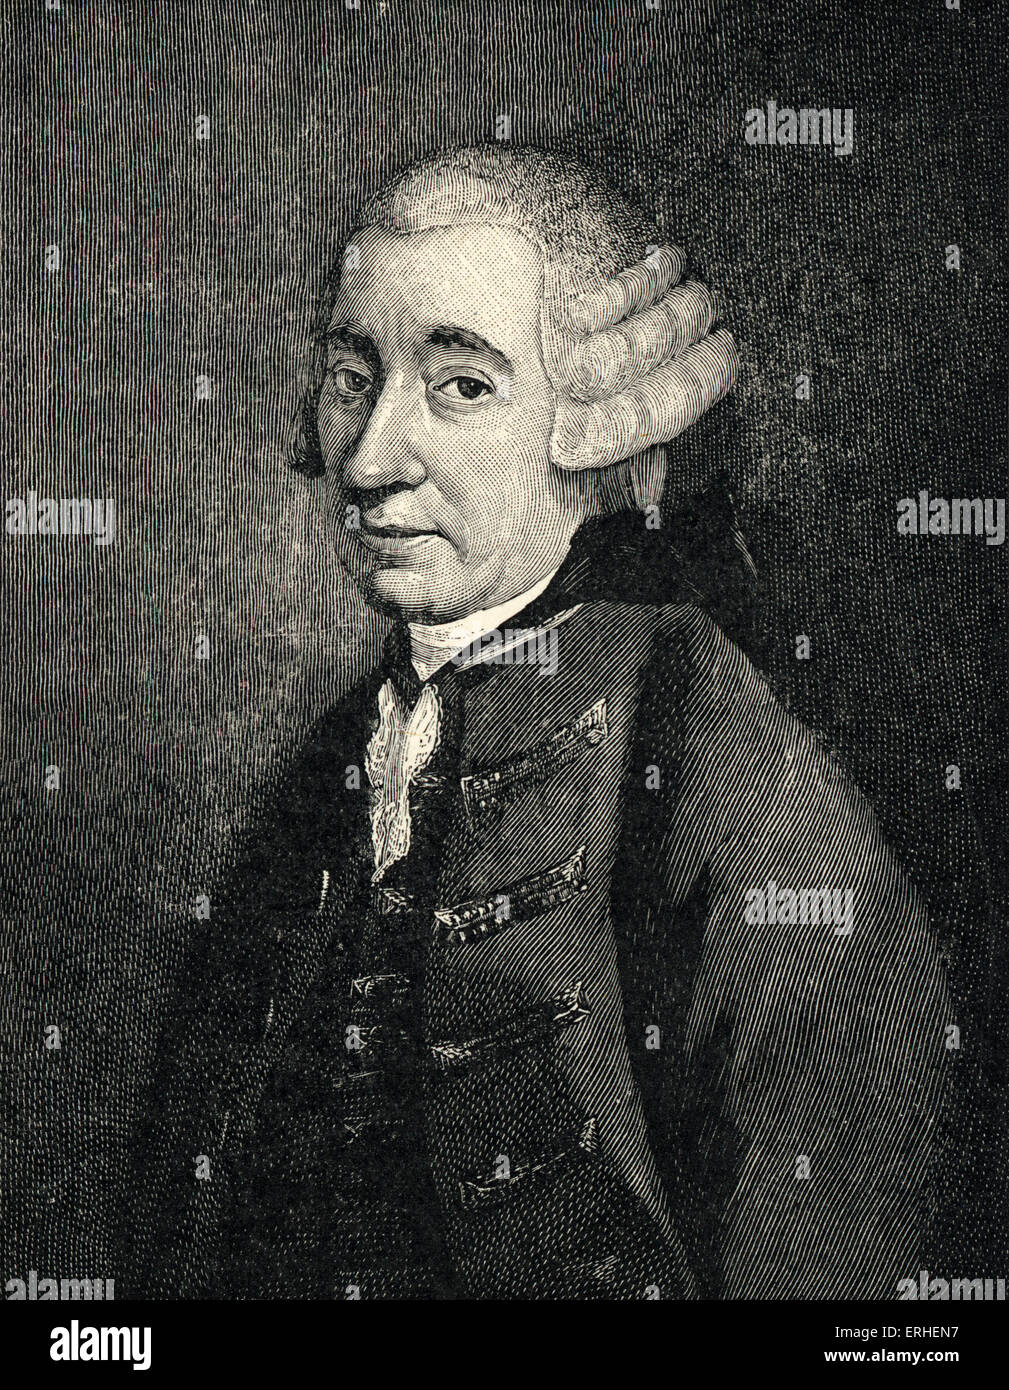 Tobias Smollett - portrait. Scottish author, 19 March 1721 - 17 September 1771 - painted in Italy about 1770 Stock Photo